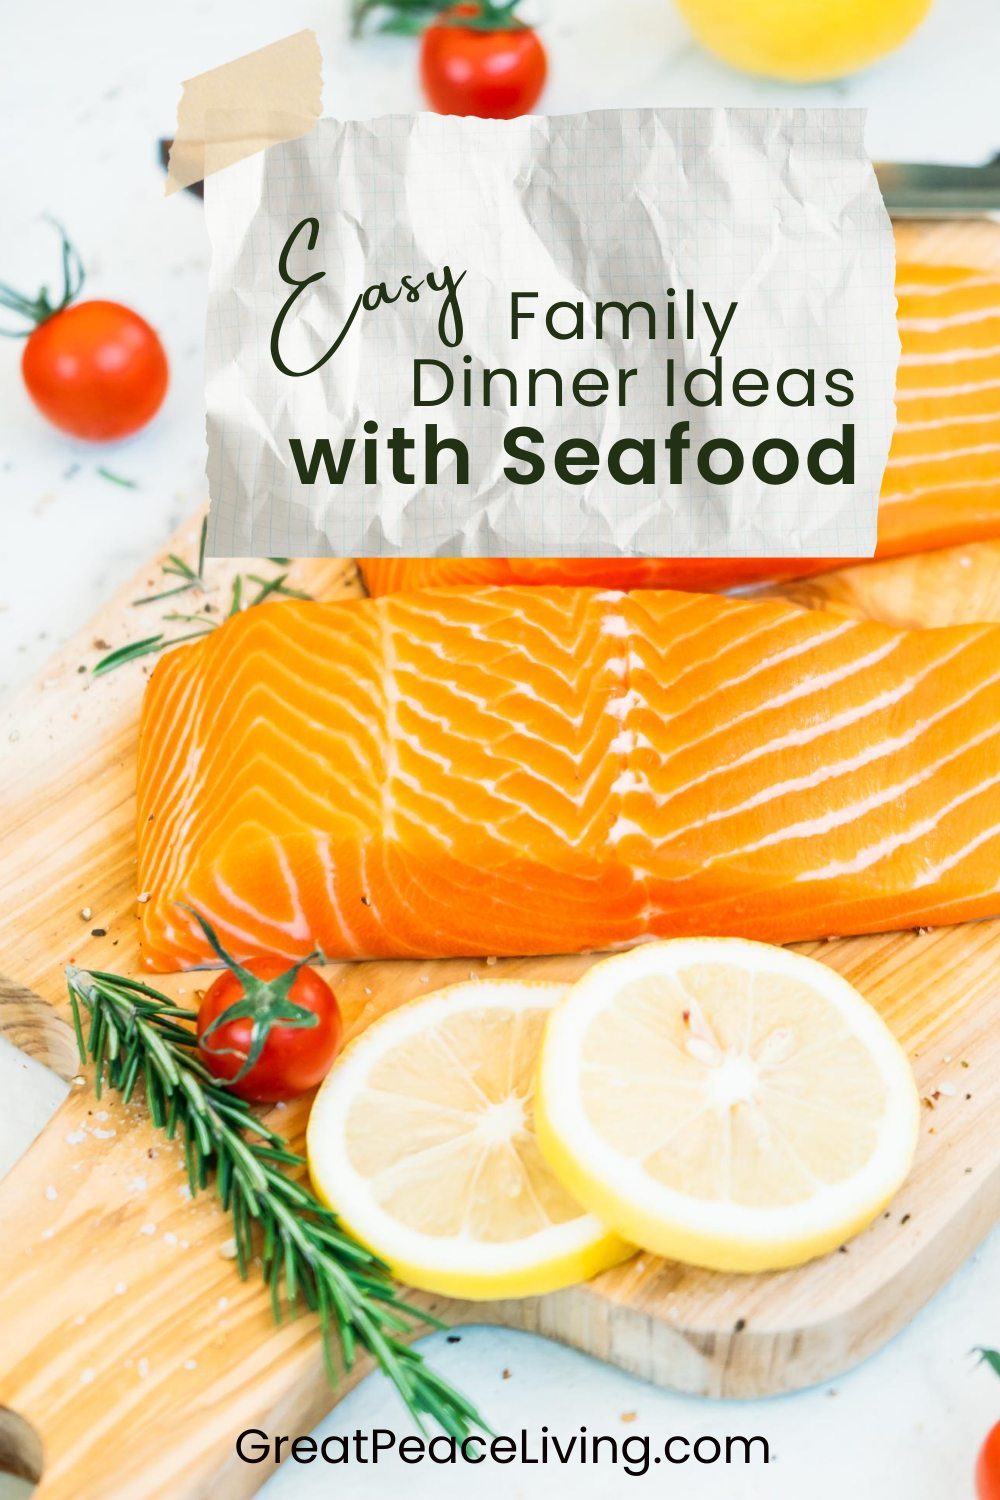 Easy Family Dinner Ideas with Seafood